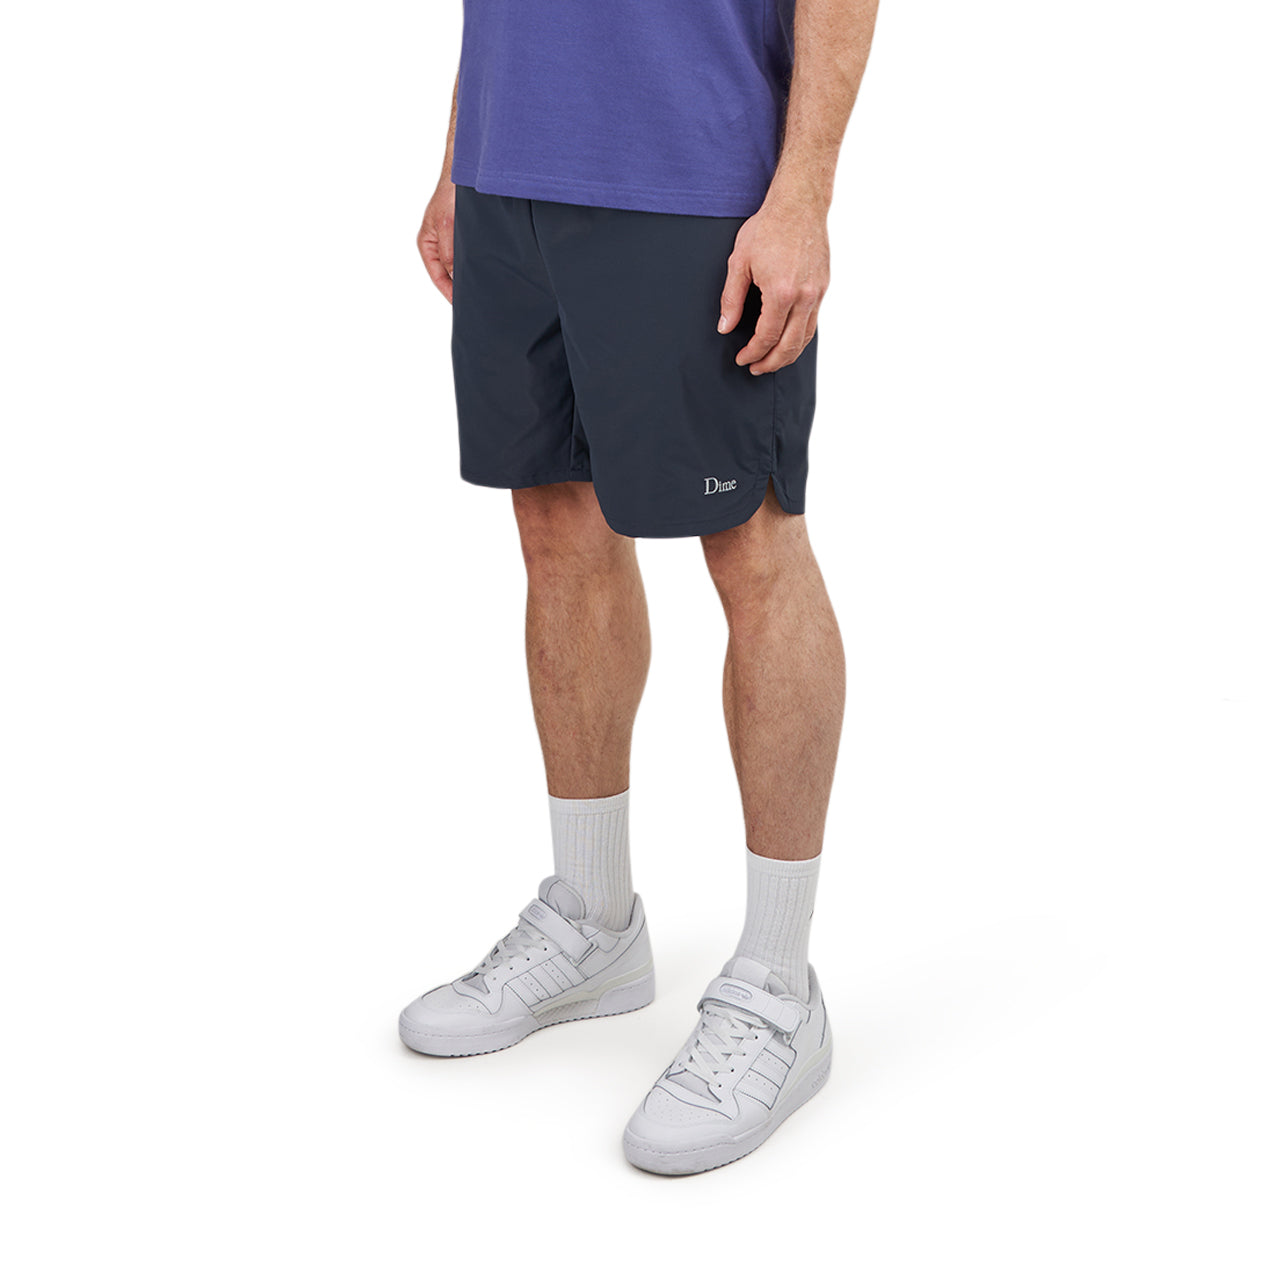 Dime Classic Shorts (Navy)  - Allike Store